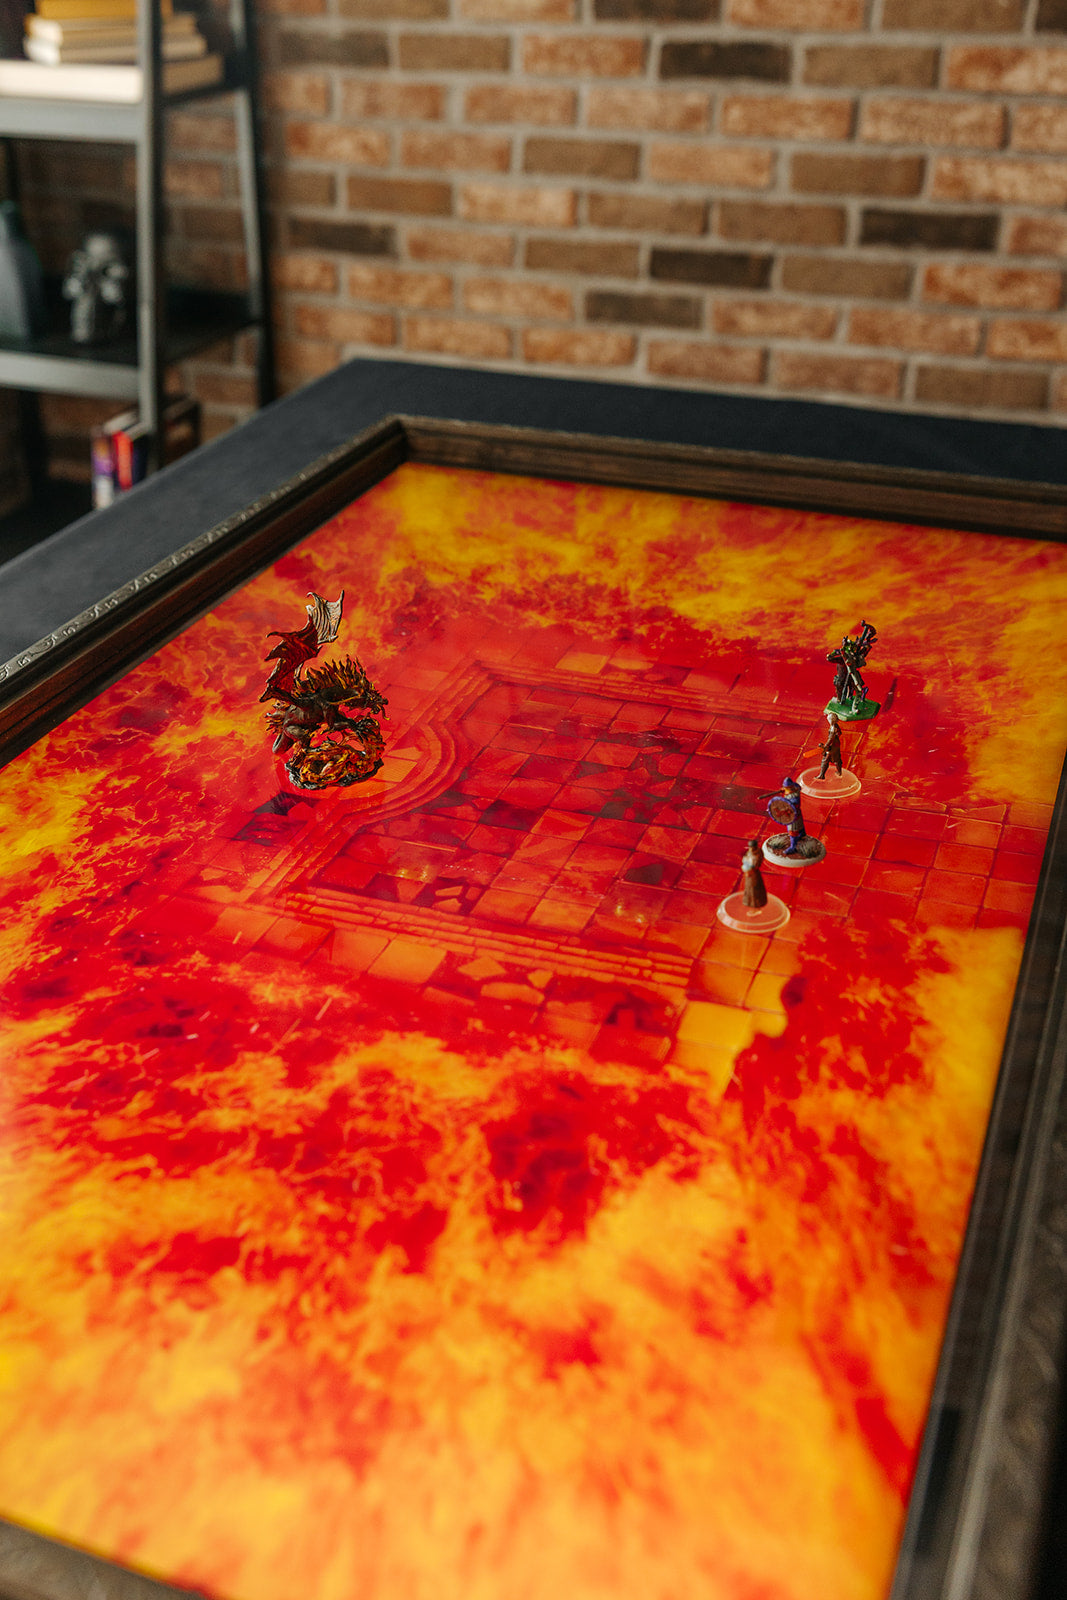 Made to Order: Portable RPG Digital Table Top (TV Included) and Cooling System